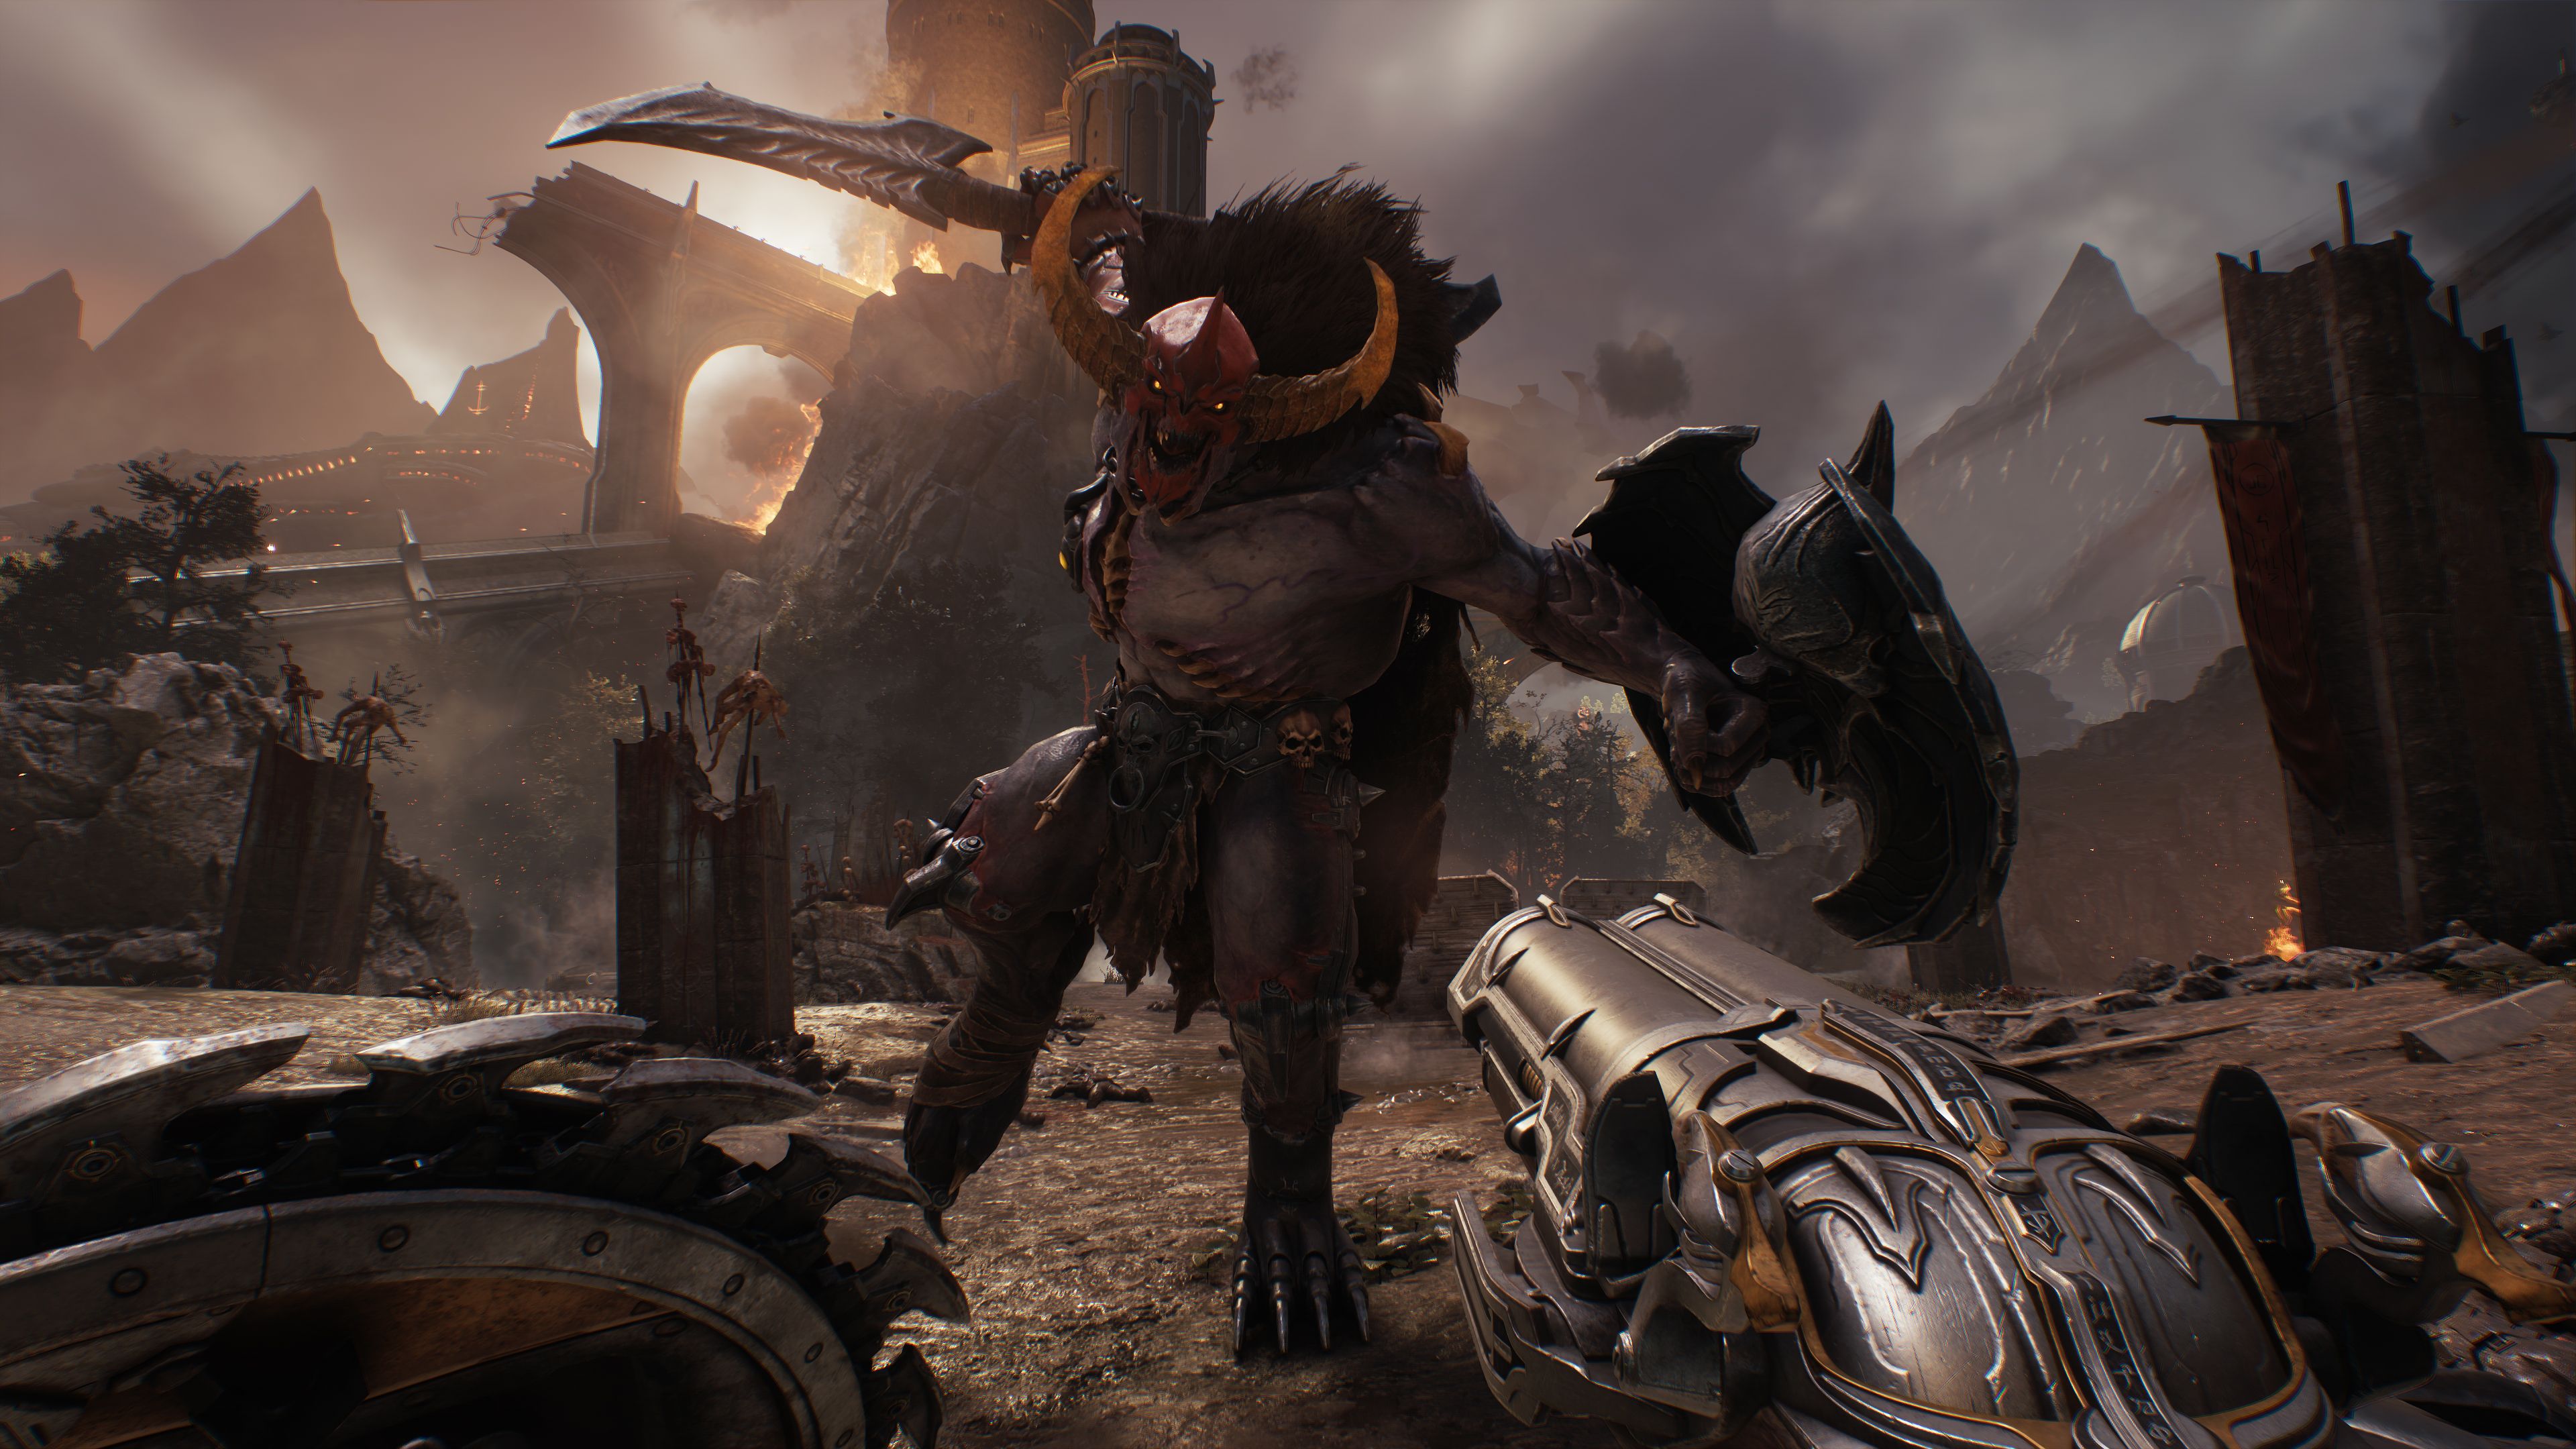 Super Shotgun and Shield Saw in hand, the player stands their ground against a charging demon.